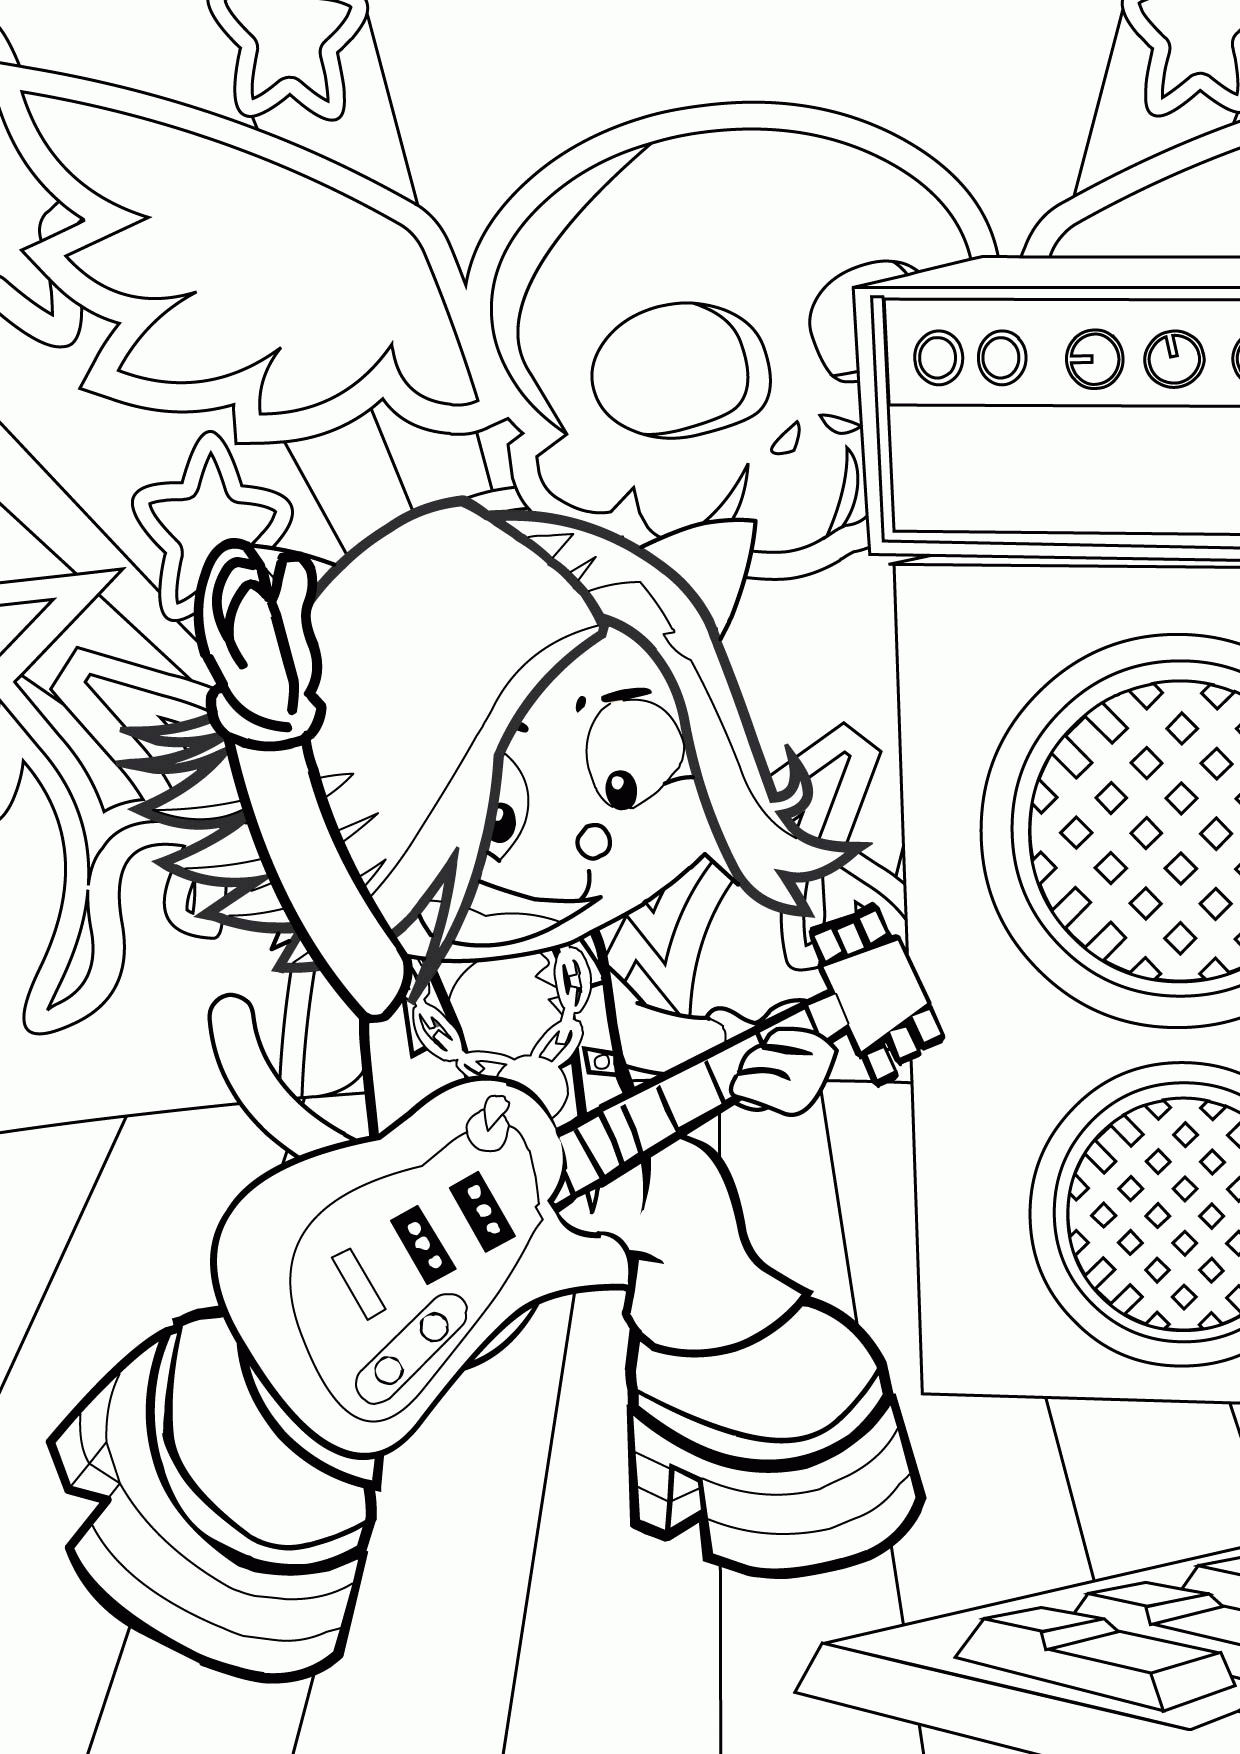 Rockstar Coloring Pages   Coloring Home